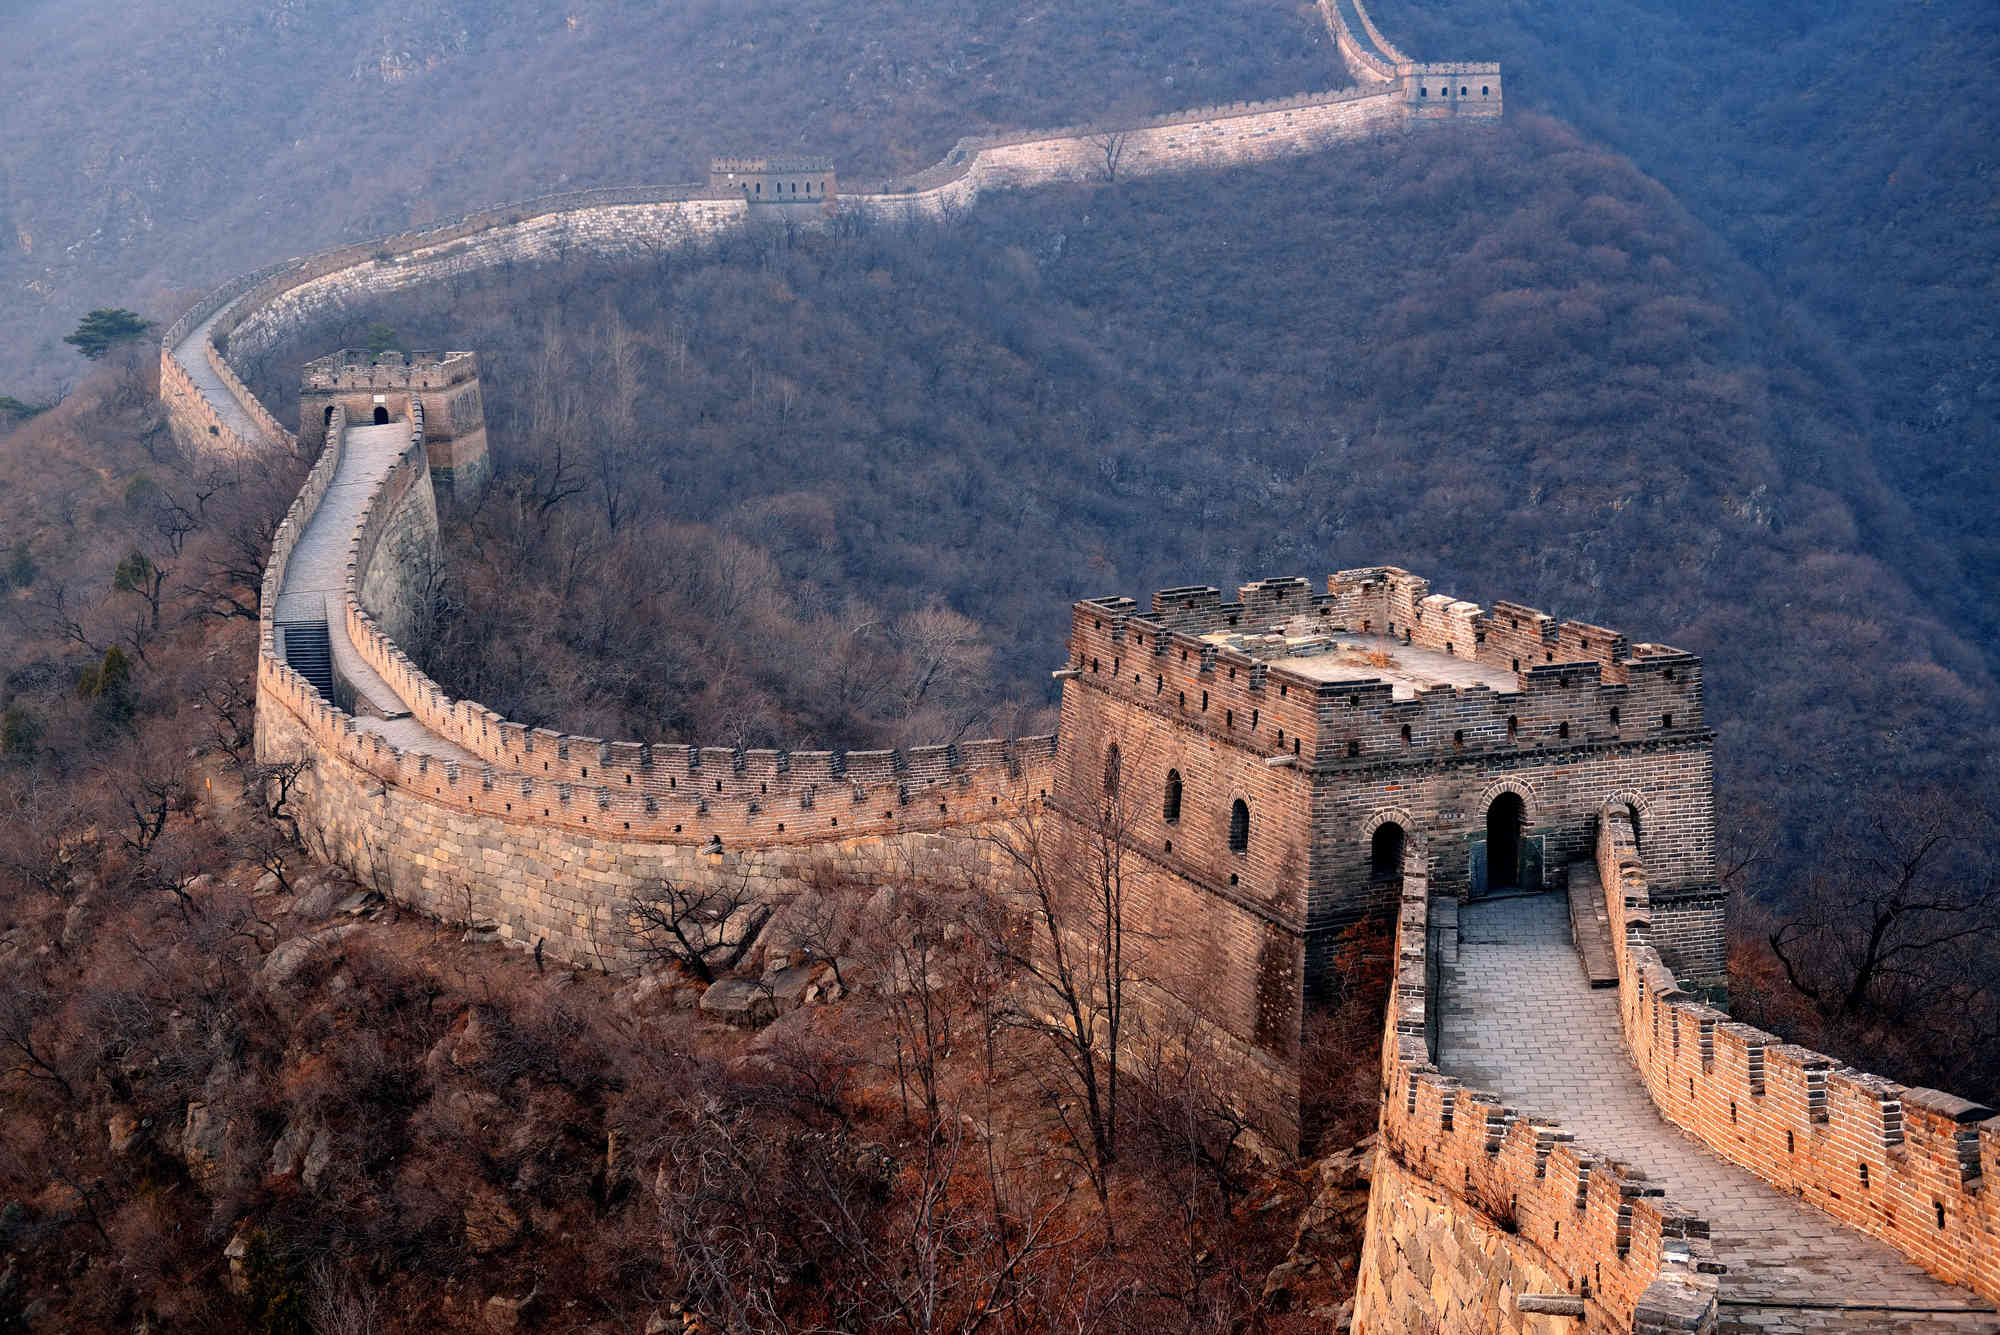 Things to see along the Great Wall of China